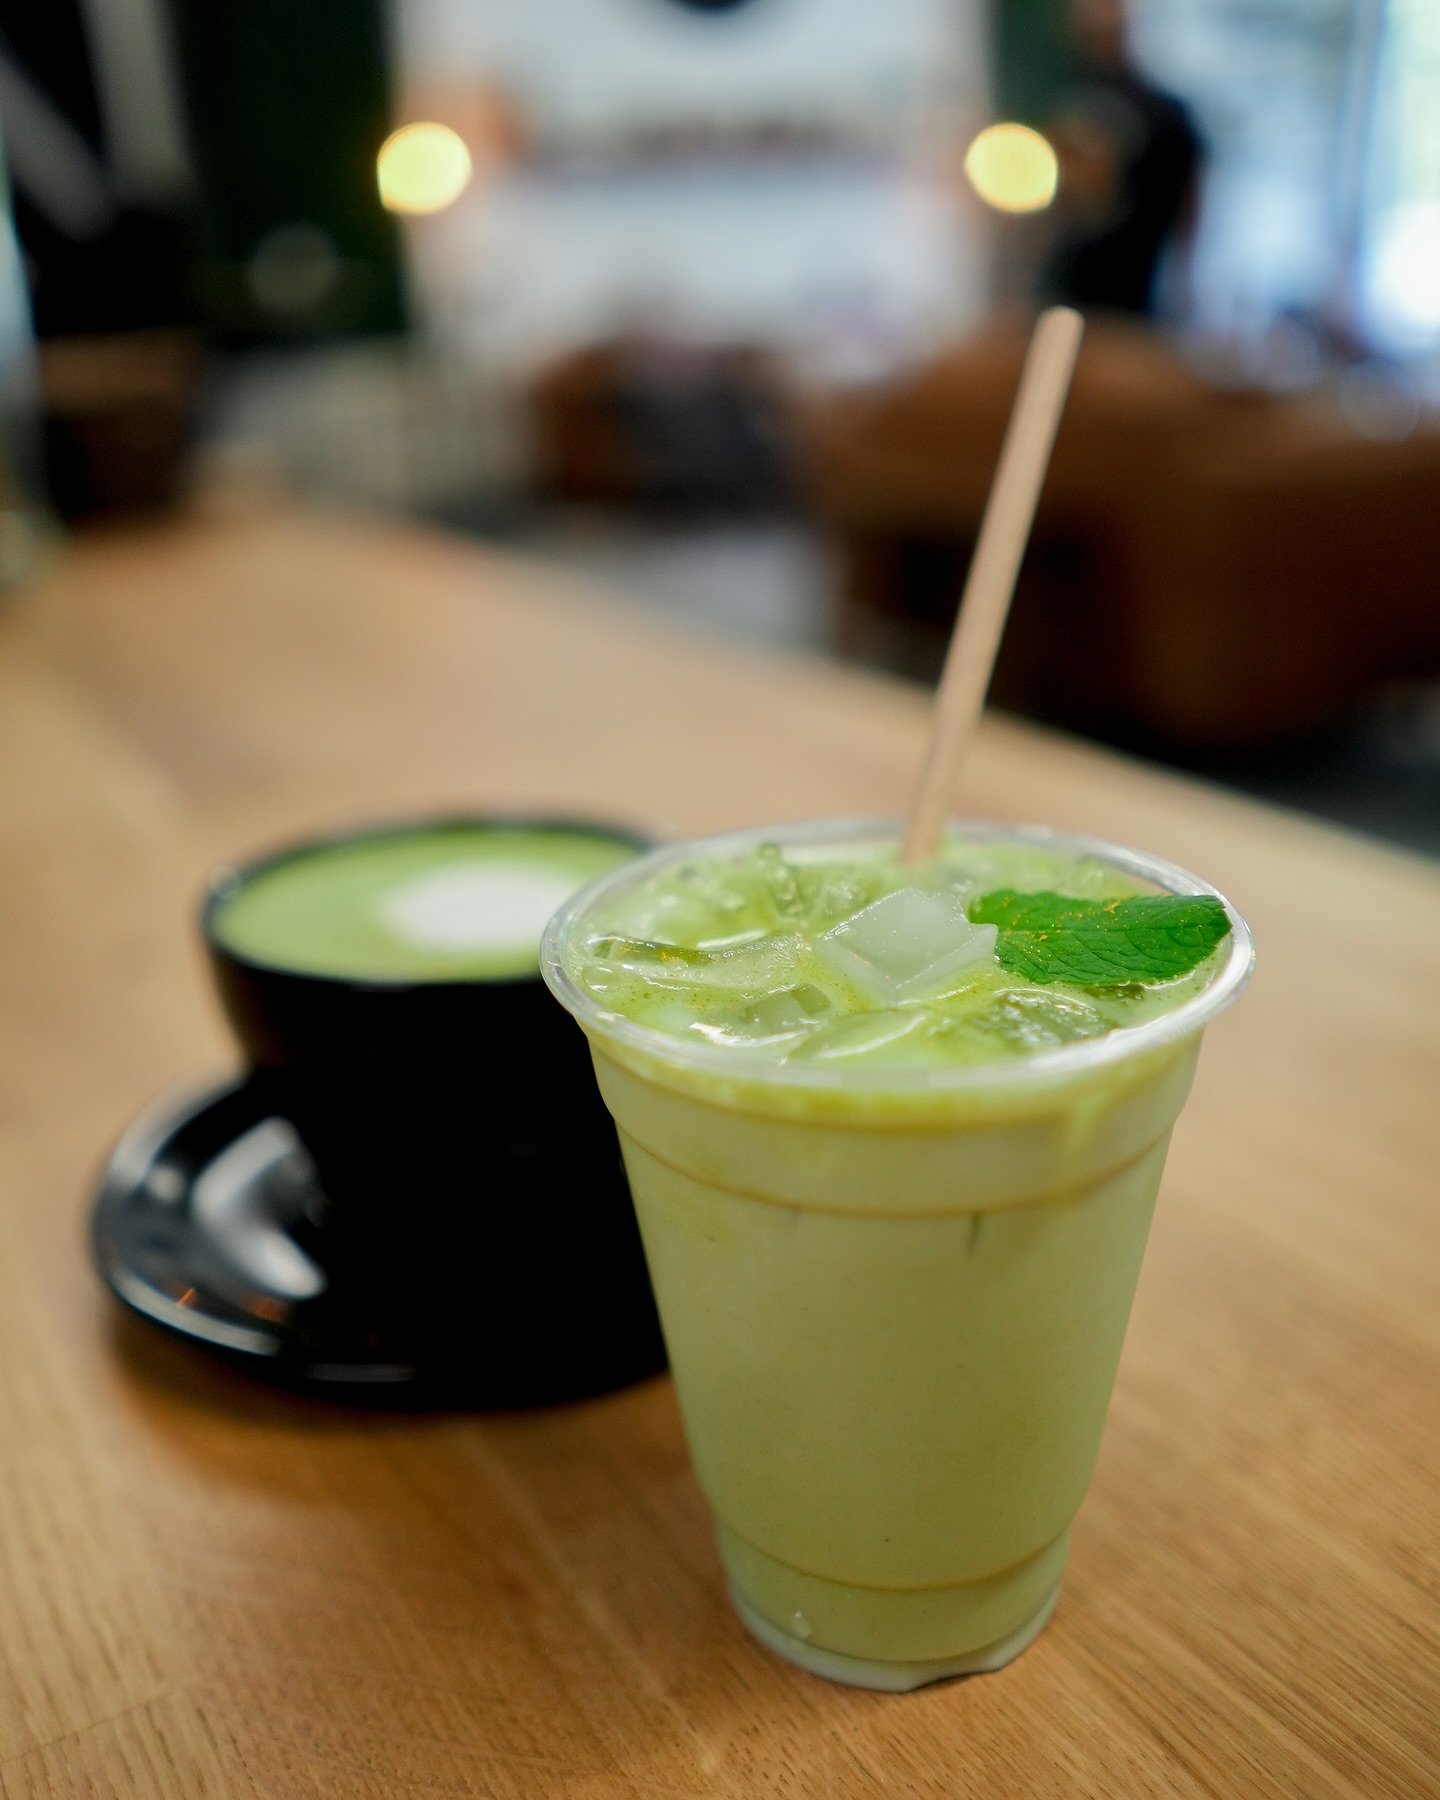 Try our Golden Drift Matcha today- a classic matcha latte with our newest salted honey syrup (infused with a hint of mint). It&rsquo;s bright and subtly sweet&hellip; perfect for these warmer days&hellip;